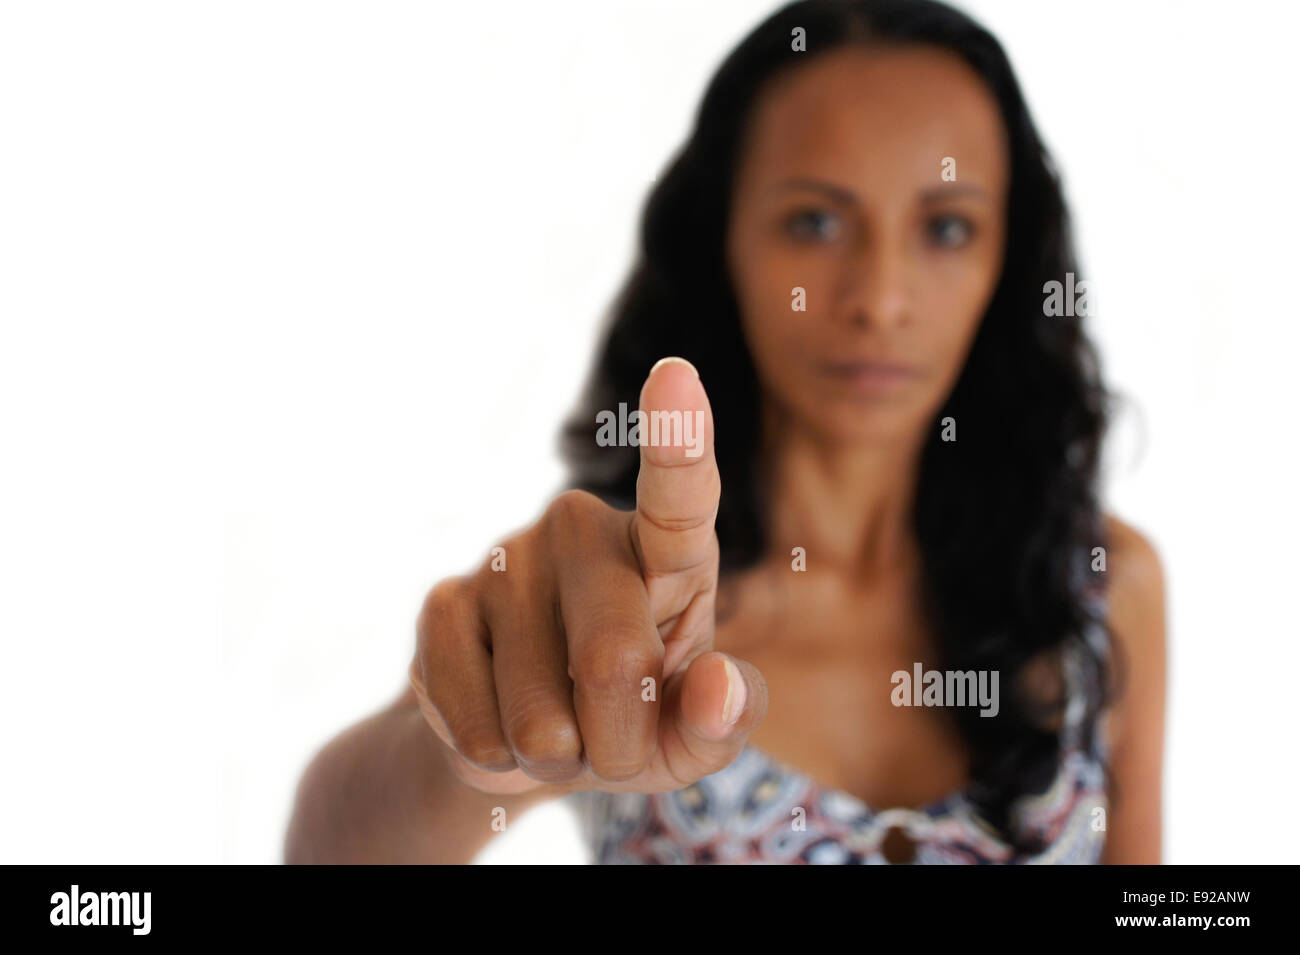 Woman pointing with Finger Stock Photo